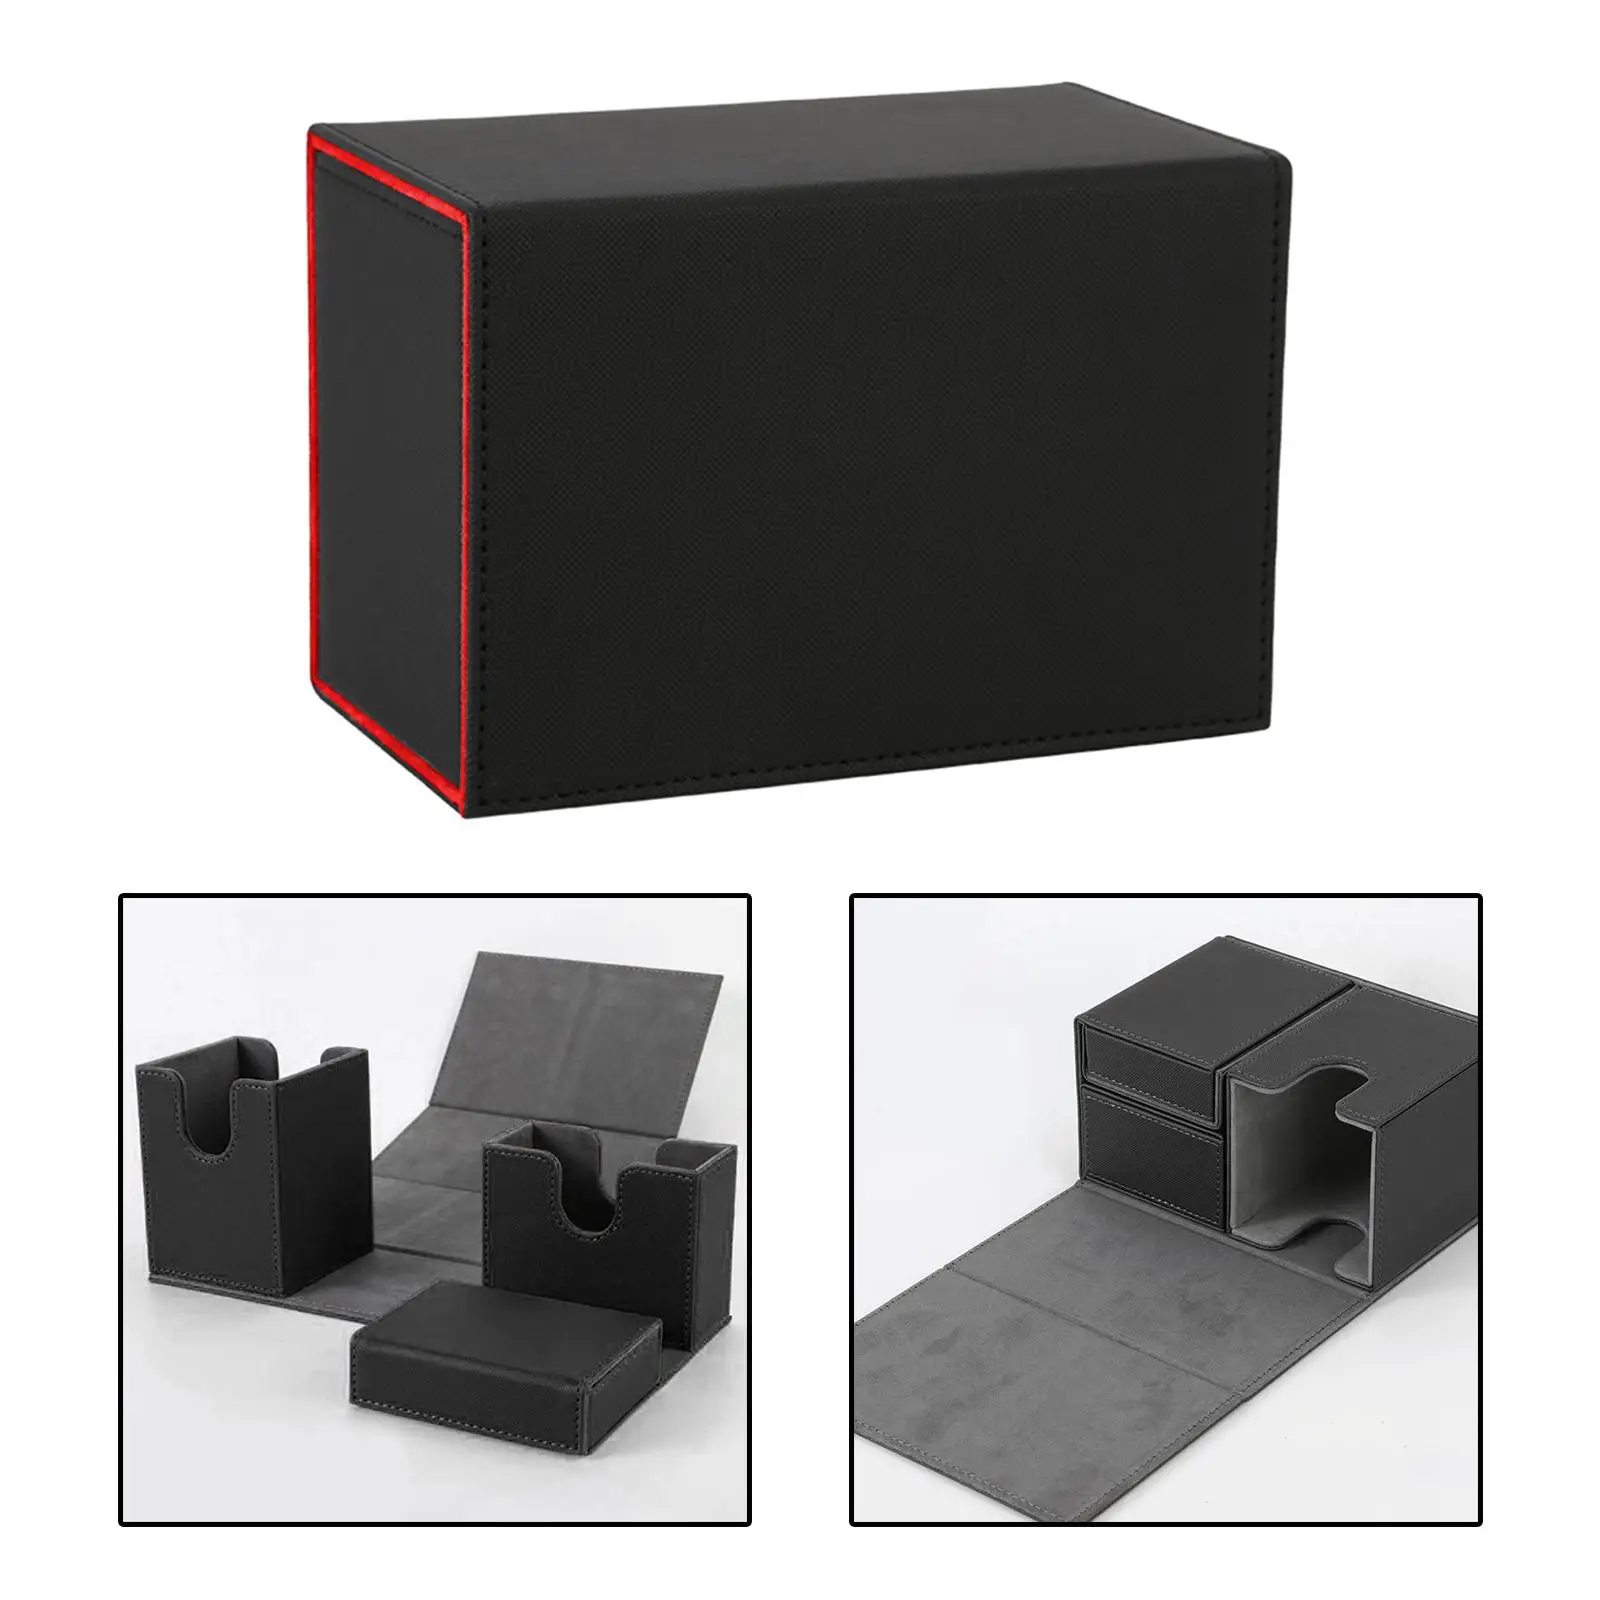 Game Card Storage Box Good Protection Sturdy for for Nds Card Board Games